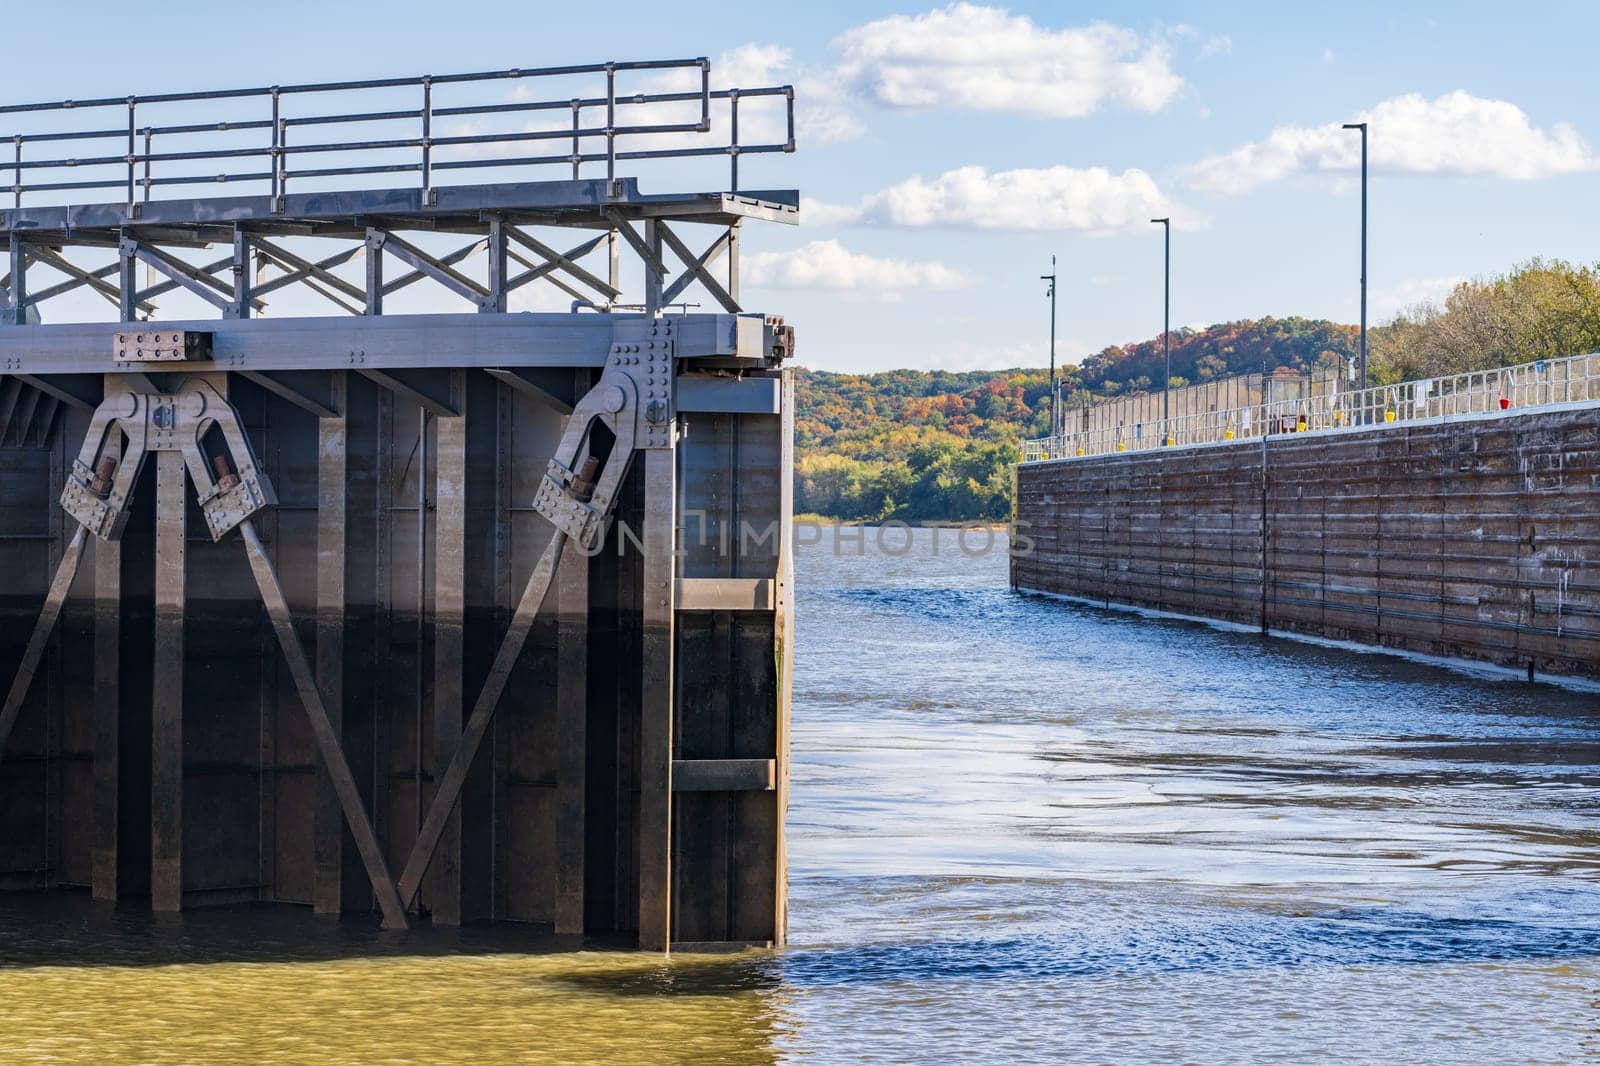 Lock gates opening on Lock and Dam 22 on Mississippi river by steheap